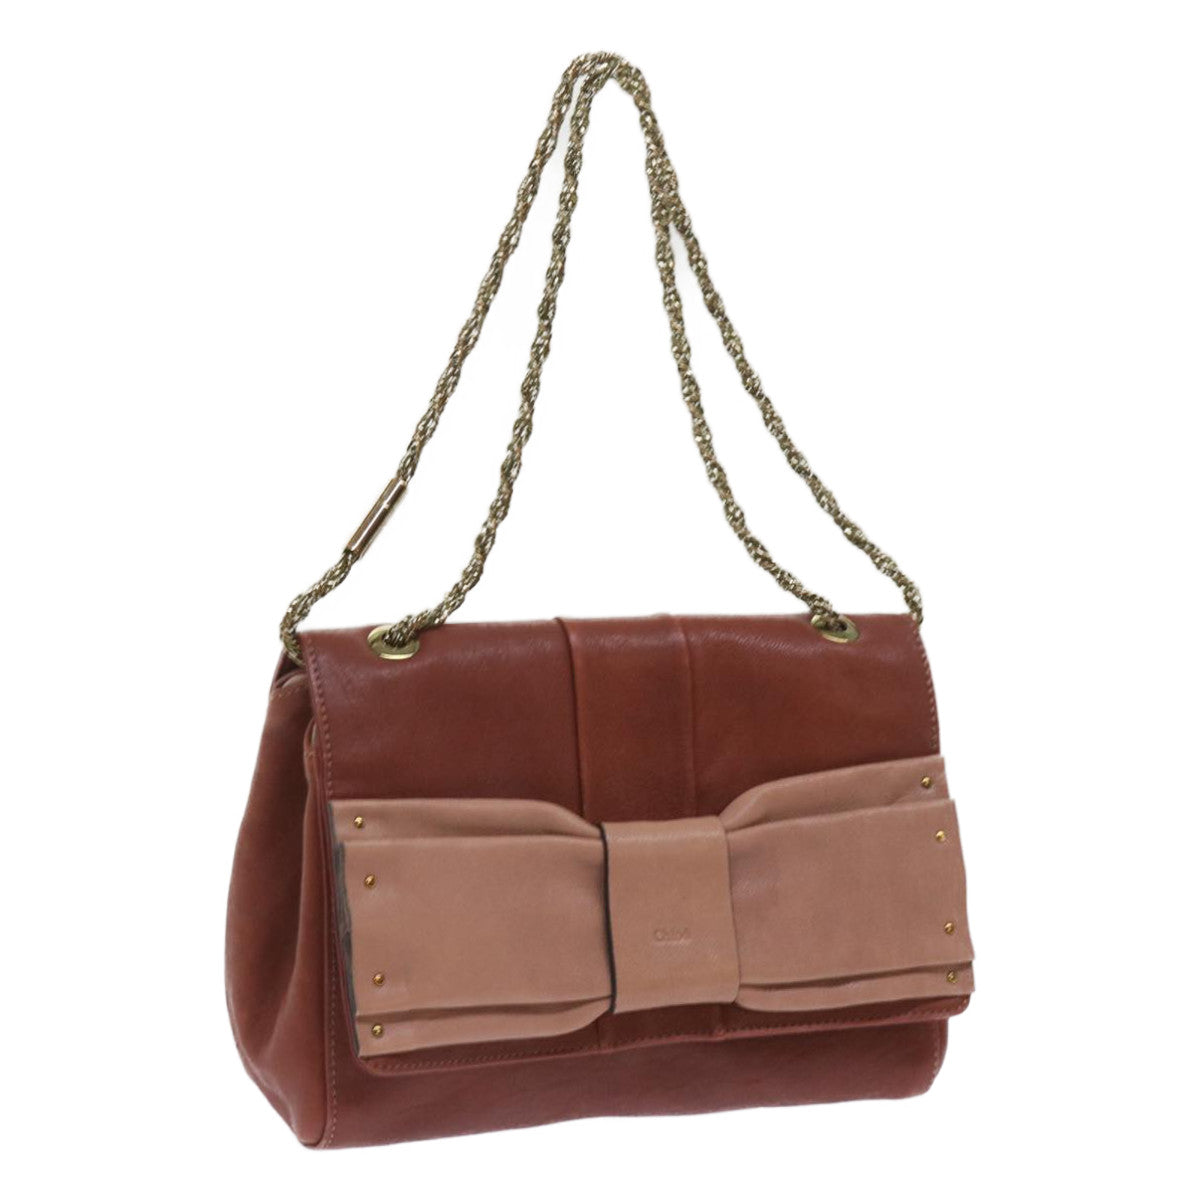 Chloe Ribbon Chain Shoulder Bag Leather Brown Auth yk10580